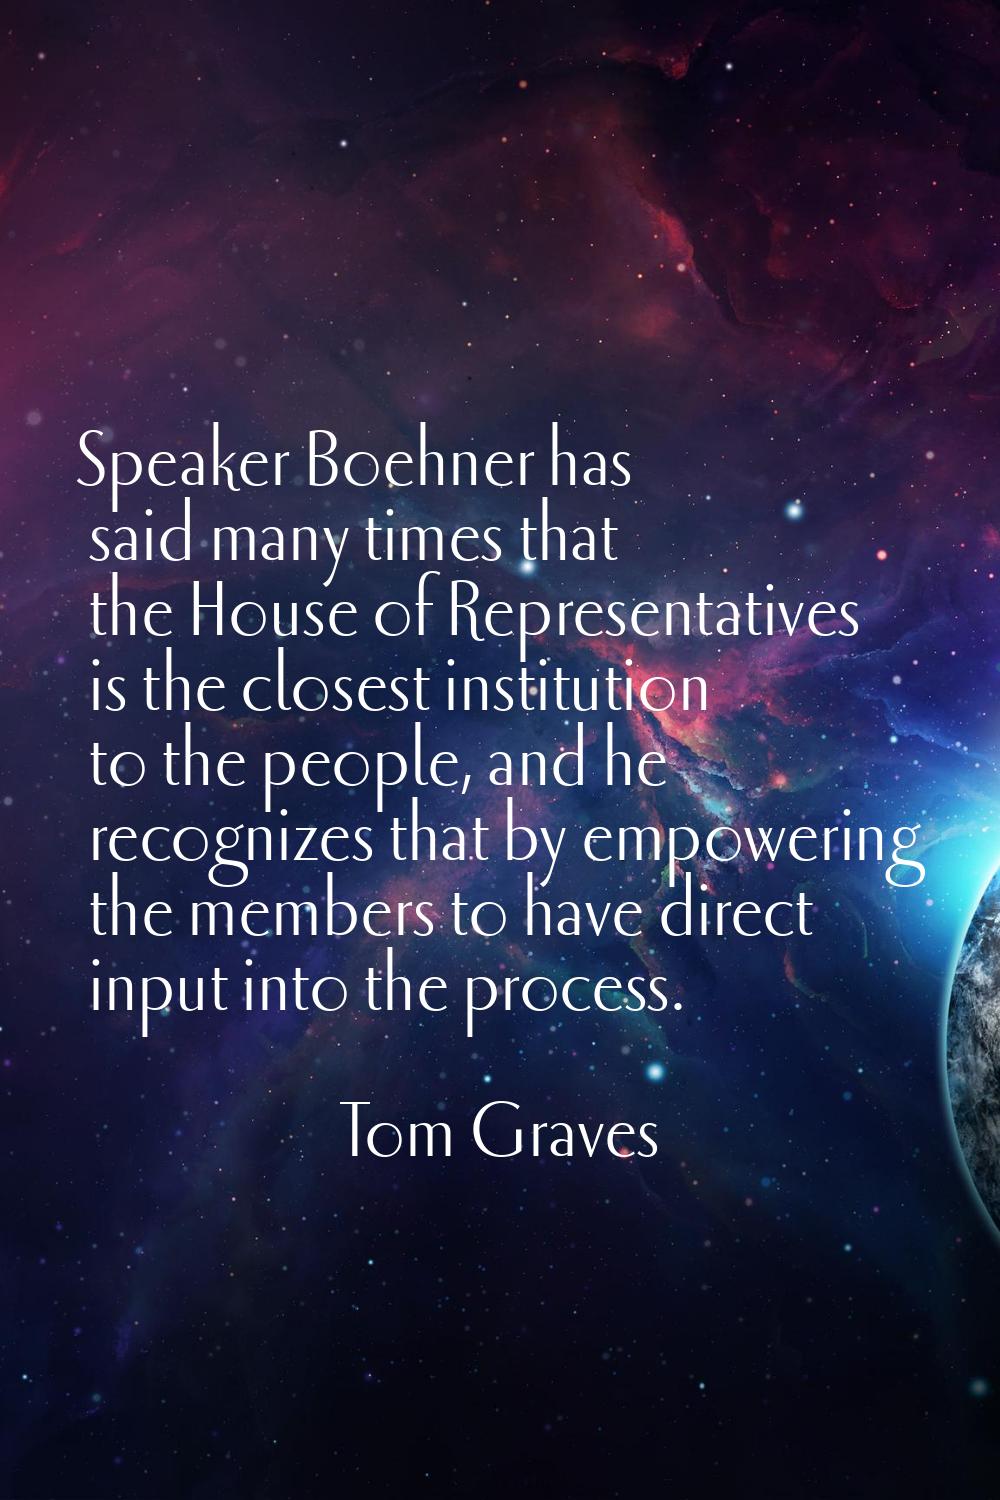 Speaker Boehner has said many times that the House of Representatives is the closest institution to